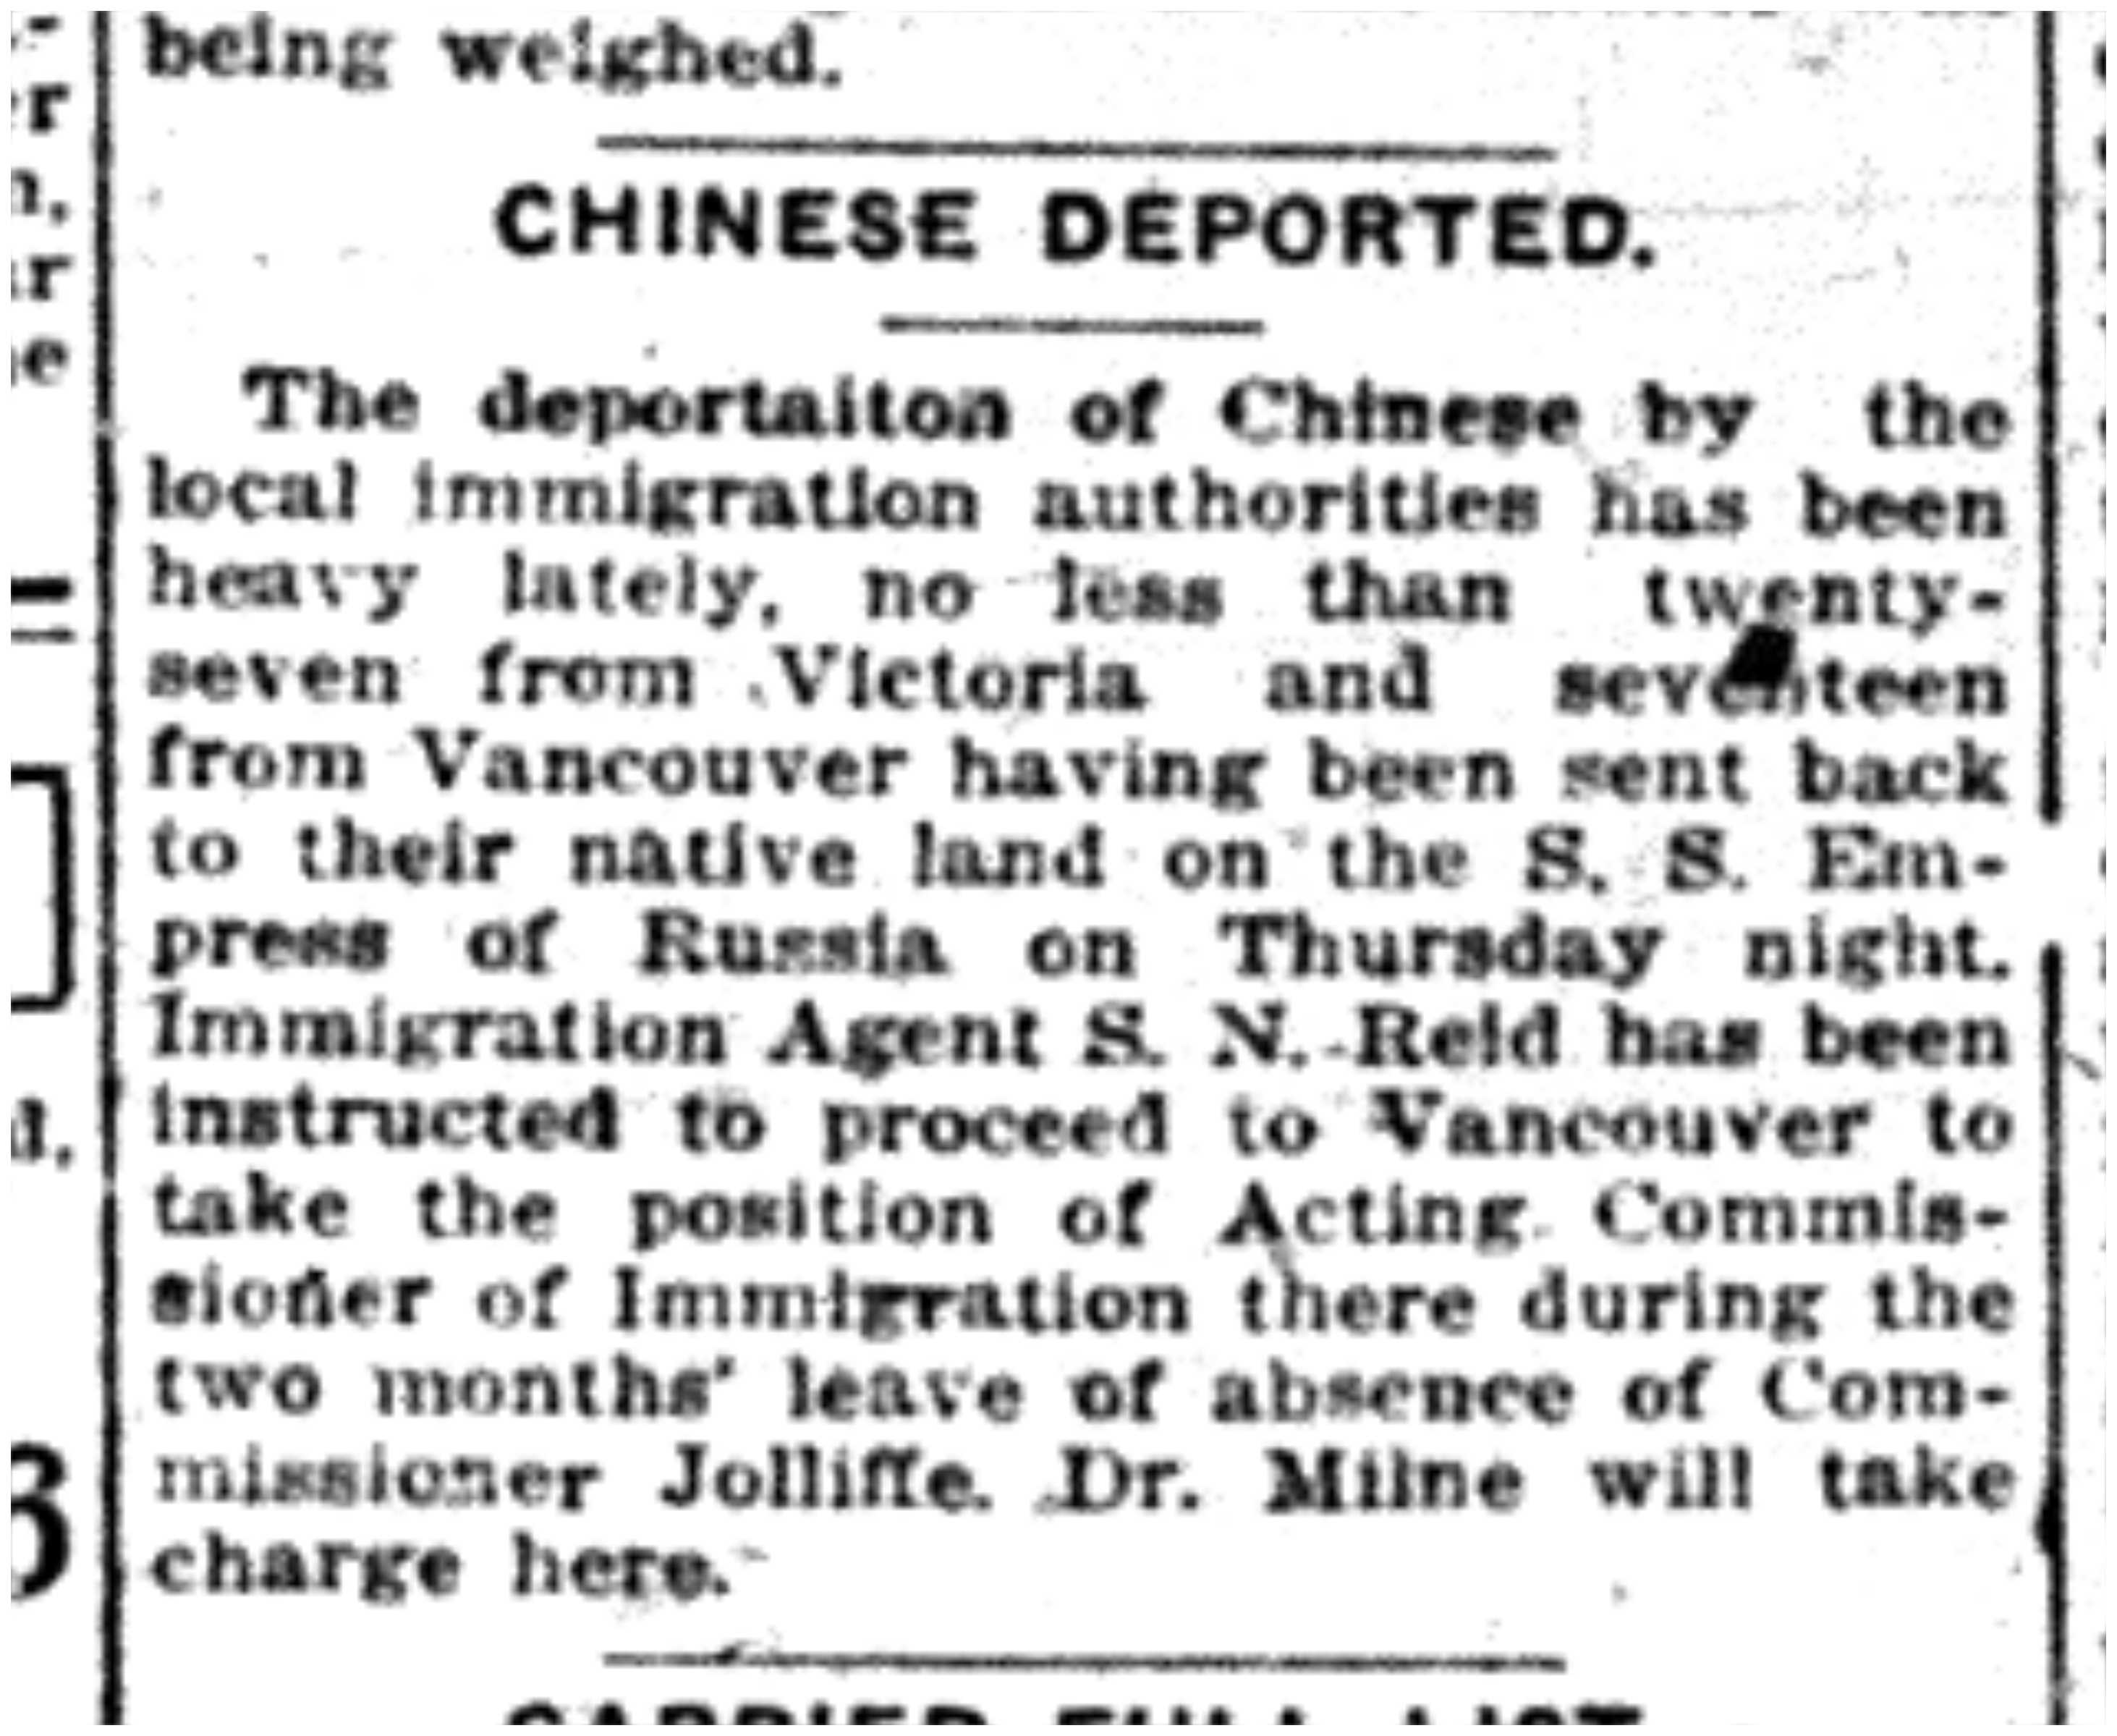 "Chinese Deported"